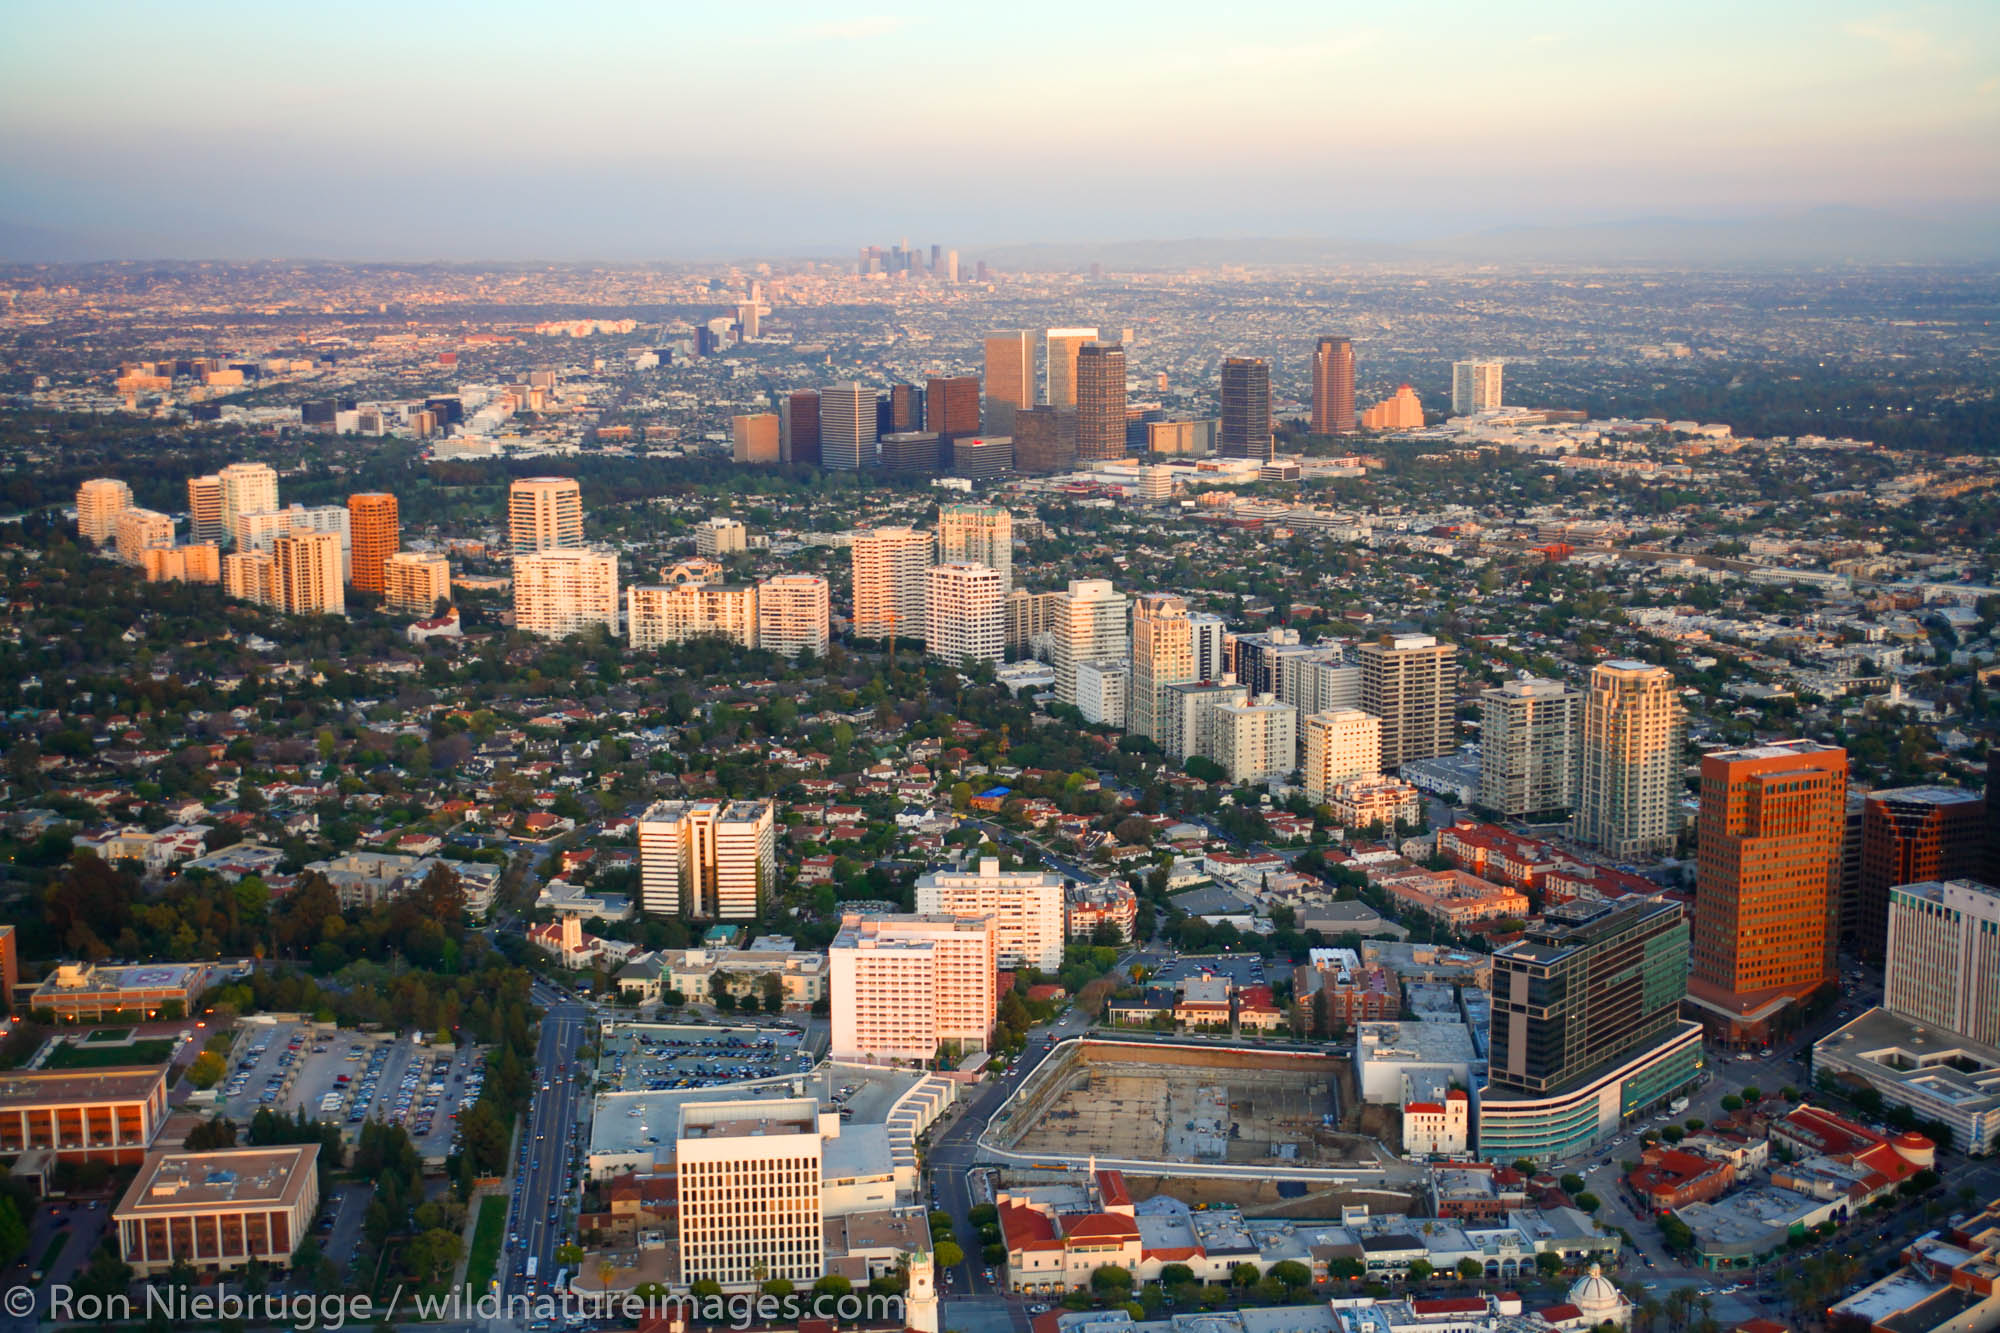 Aerial view of Beverly Hills with Wilshire Blvd in the foreground and Santa Monica Blvd, Los Angeles, California.